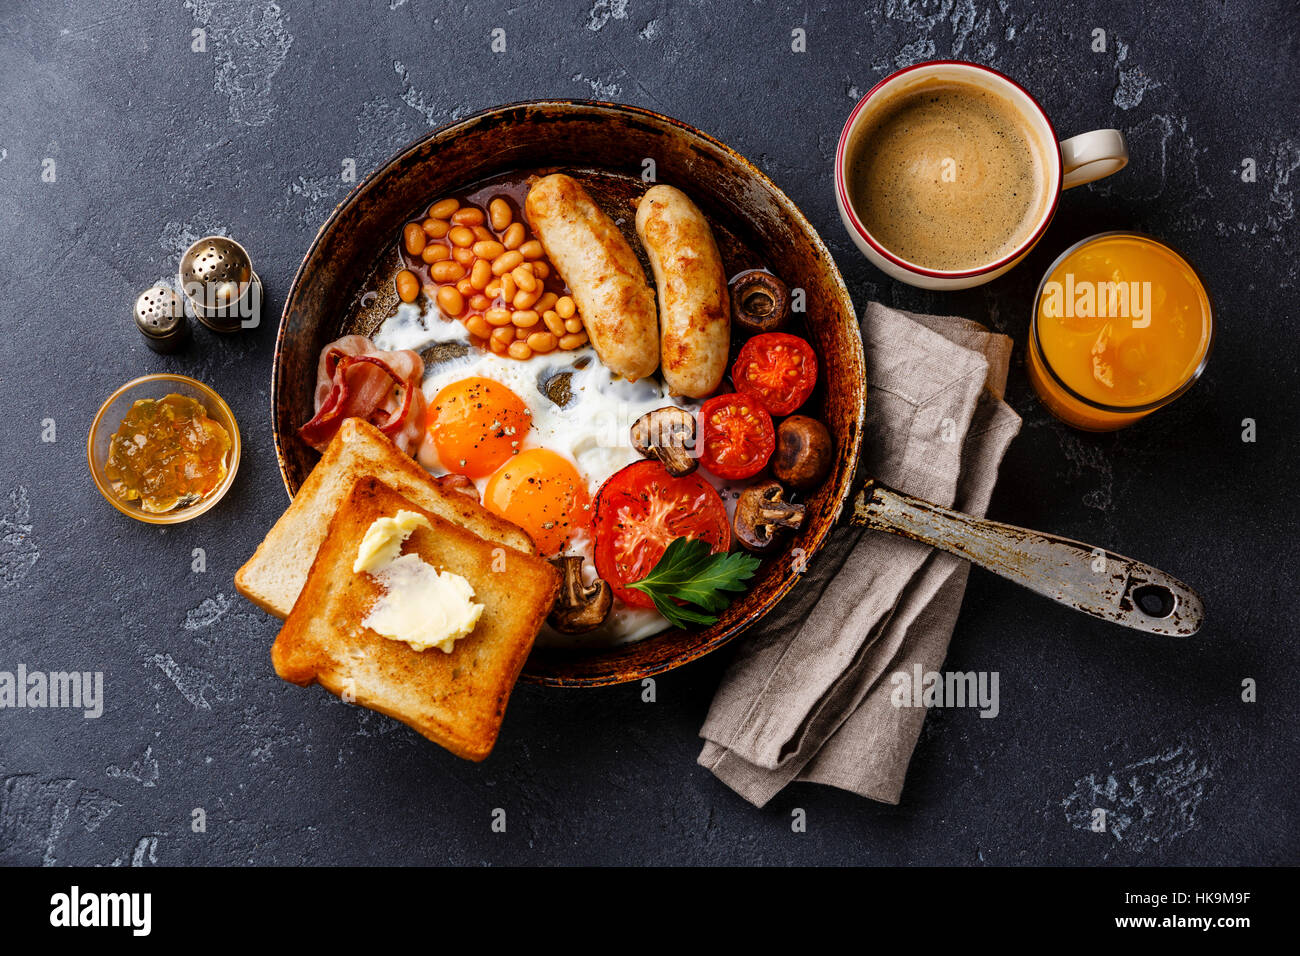 English breakfast in pan with fried eggs, sausages, bacon, beans, toasts and coffee on dark stone background Stock Photo